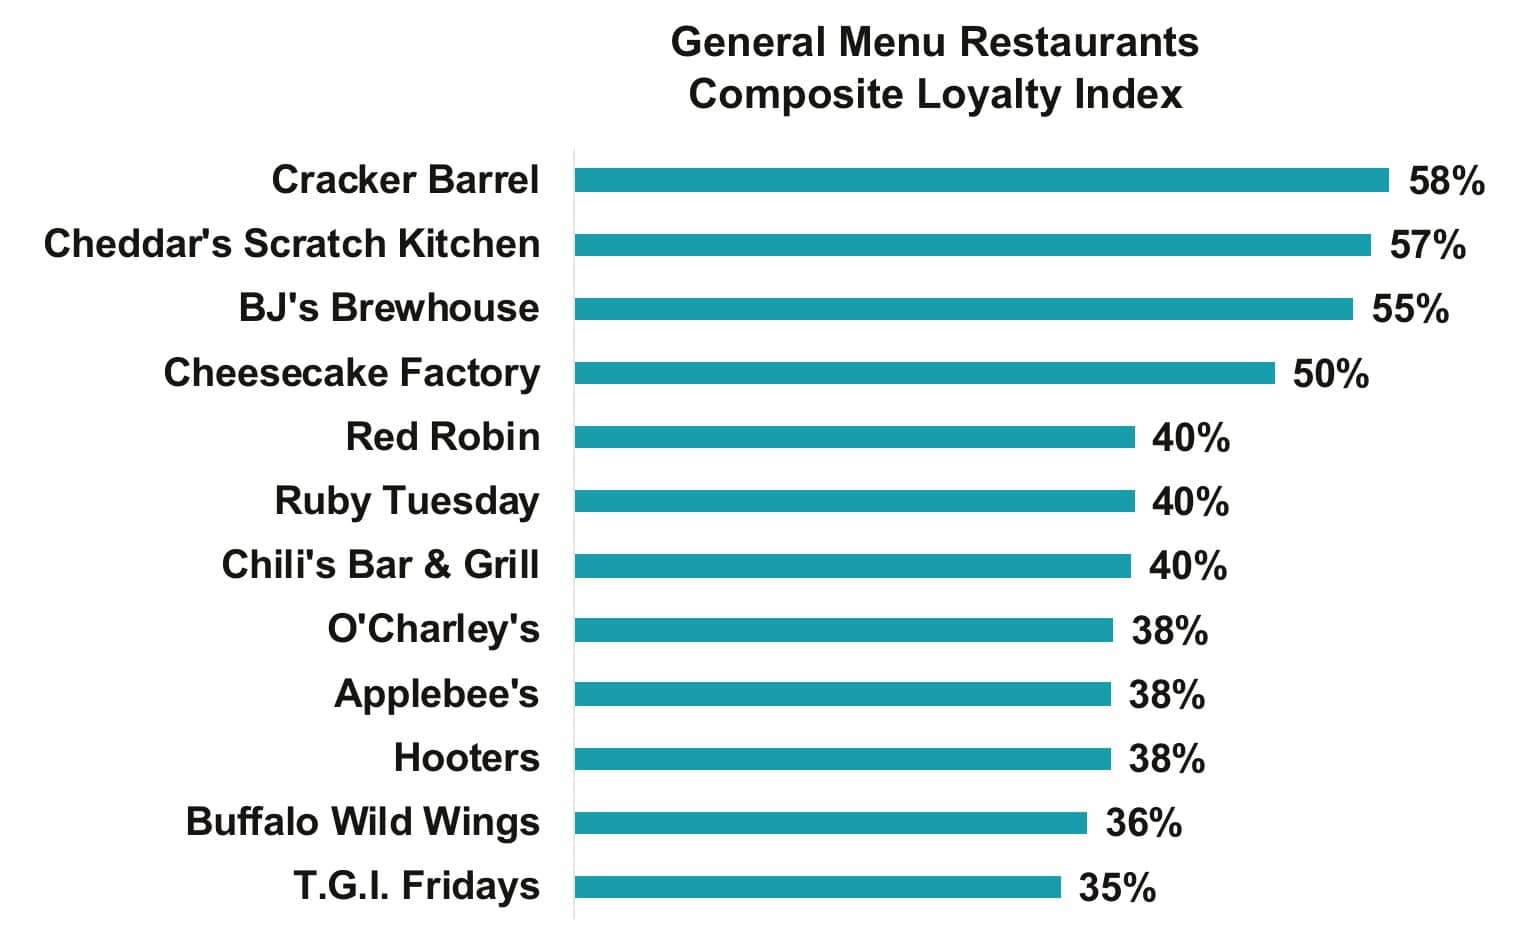 new report examines America’s favorite casual eateries